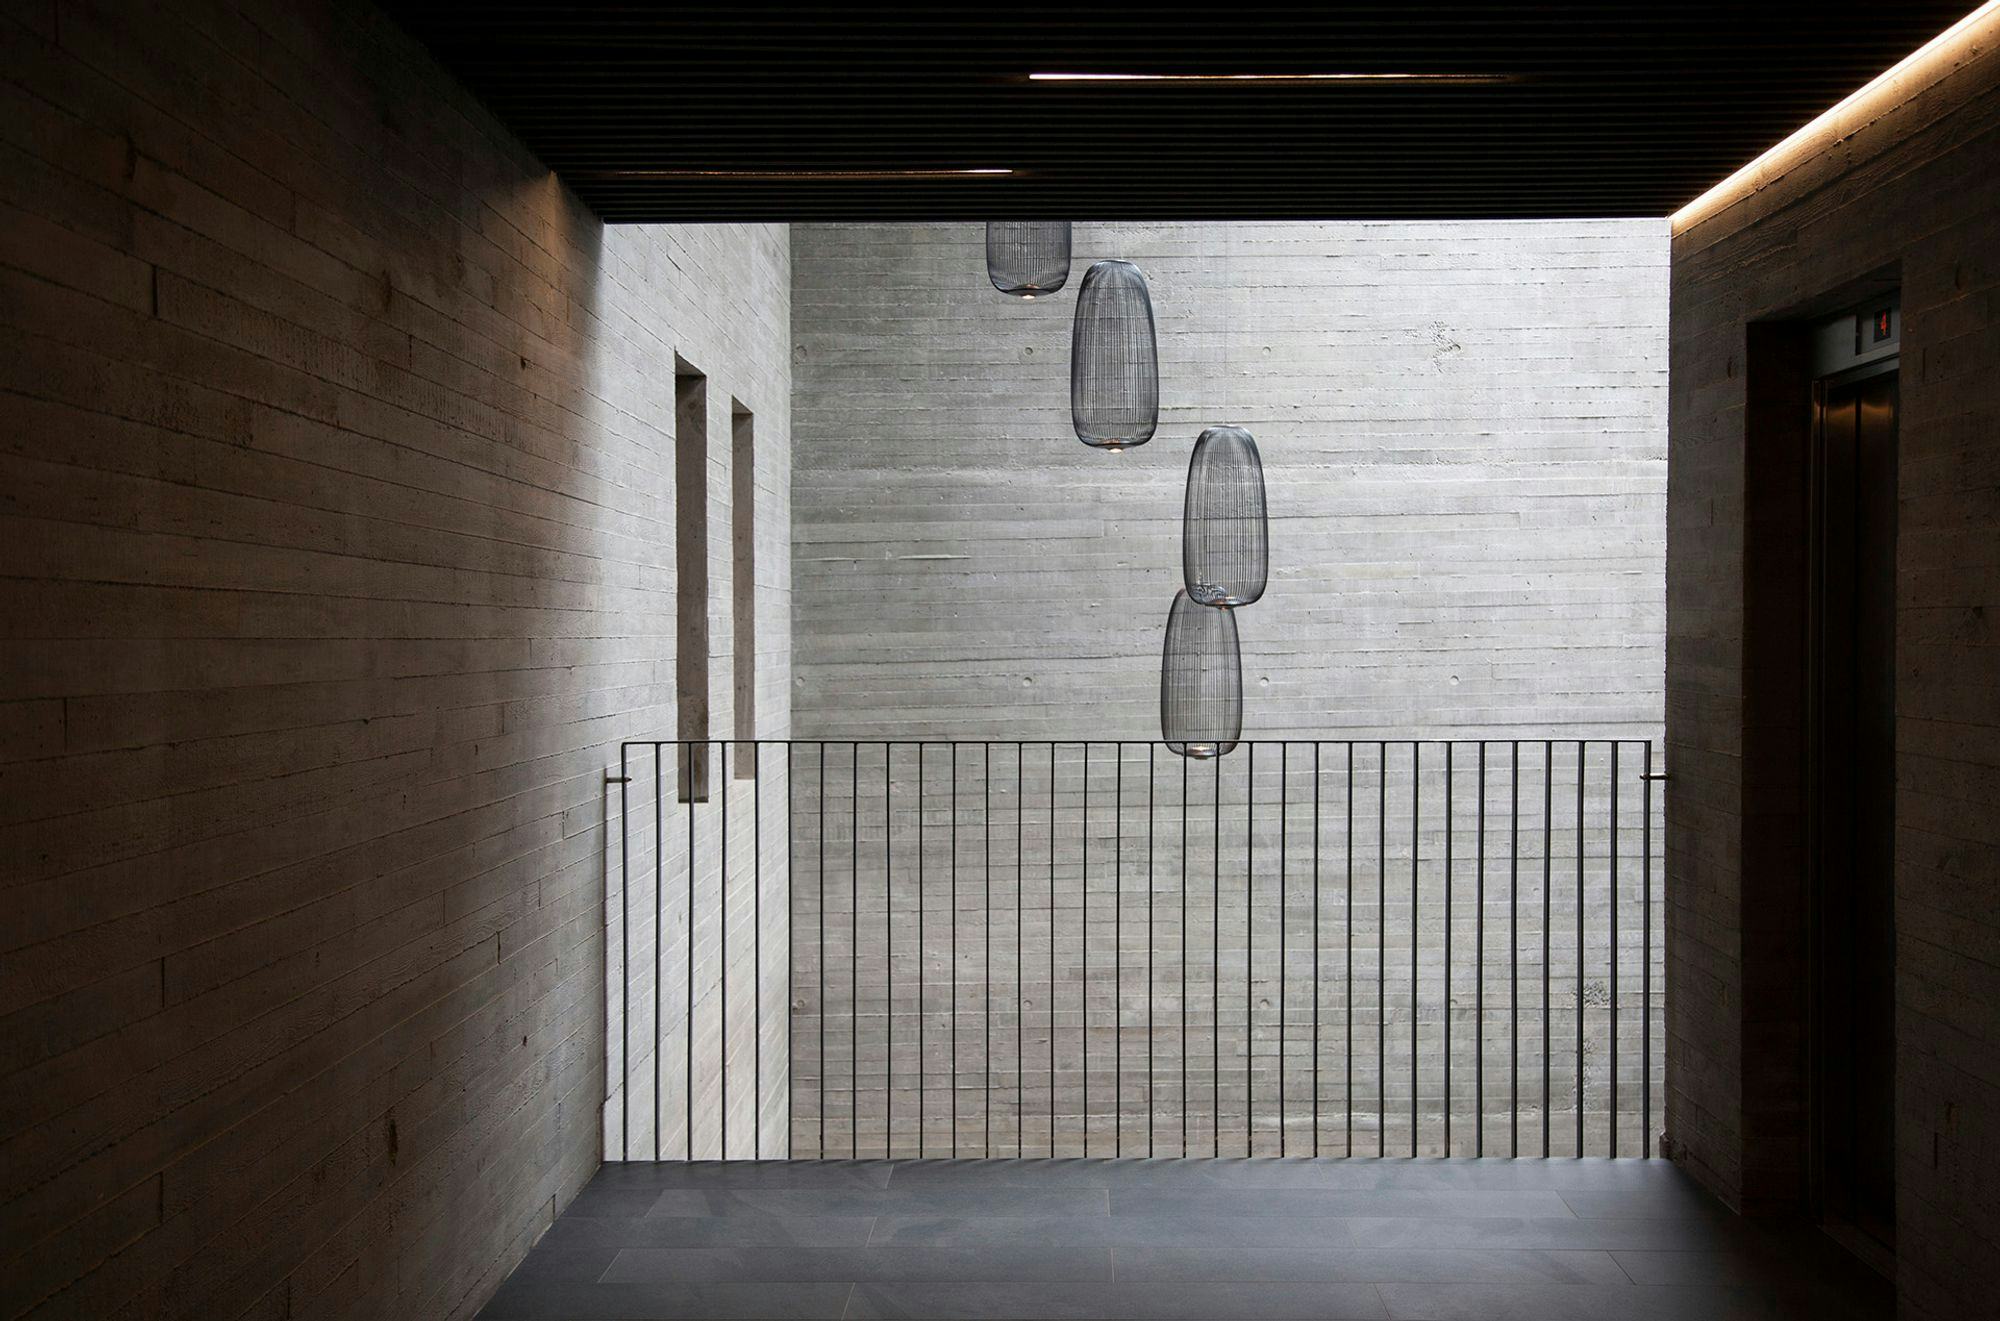 Interior of a concrete building with metal railing